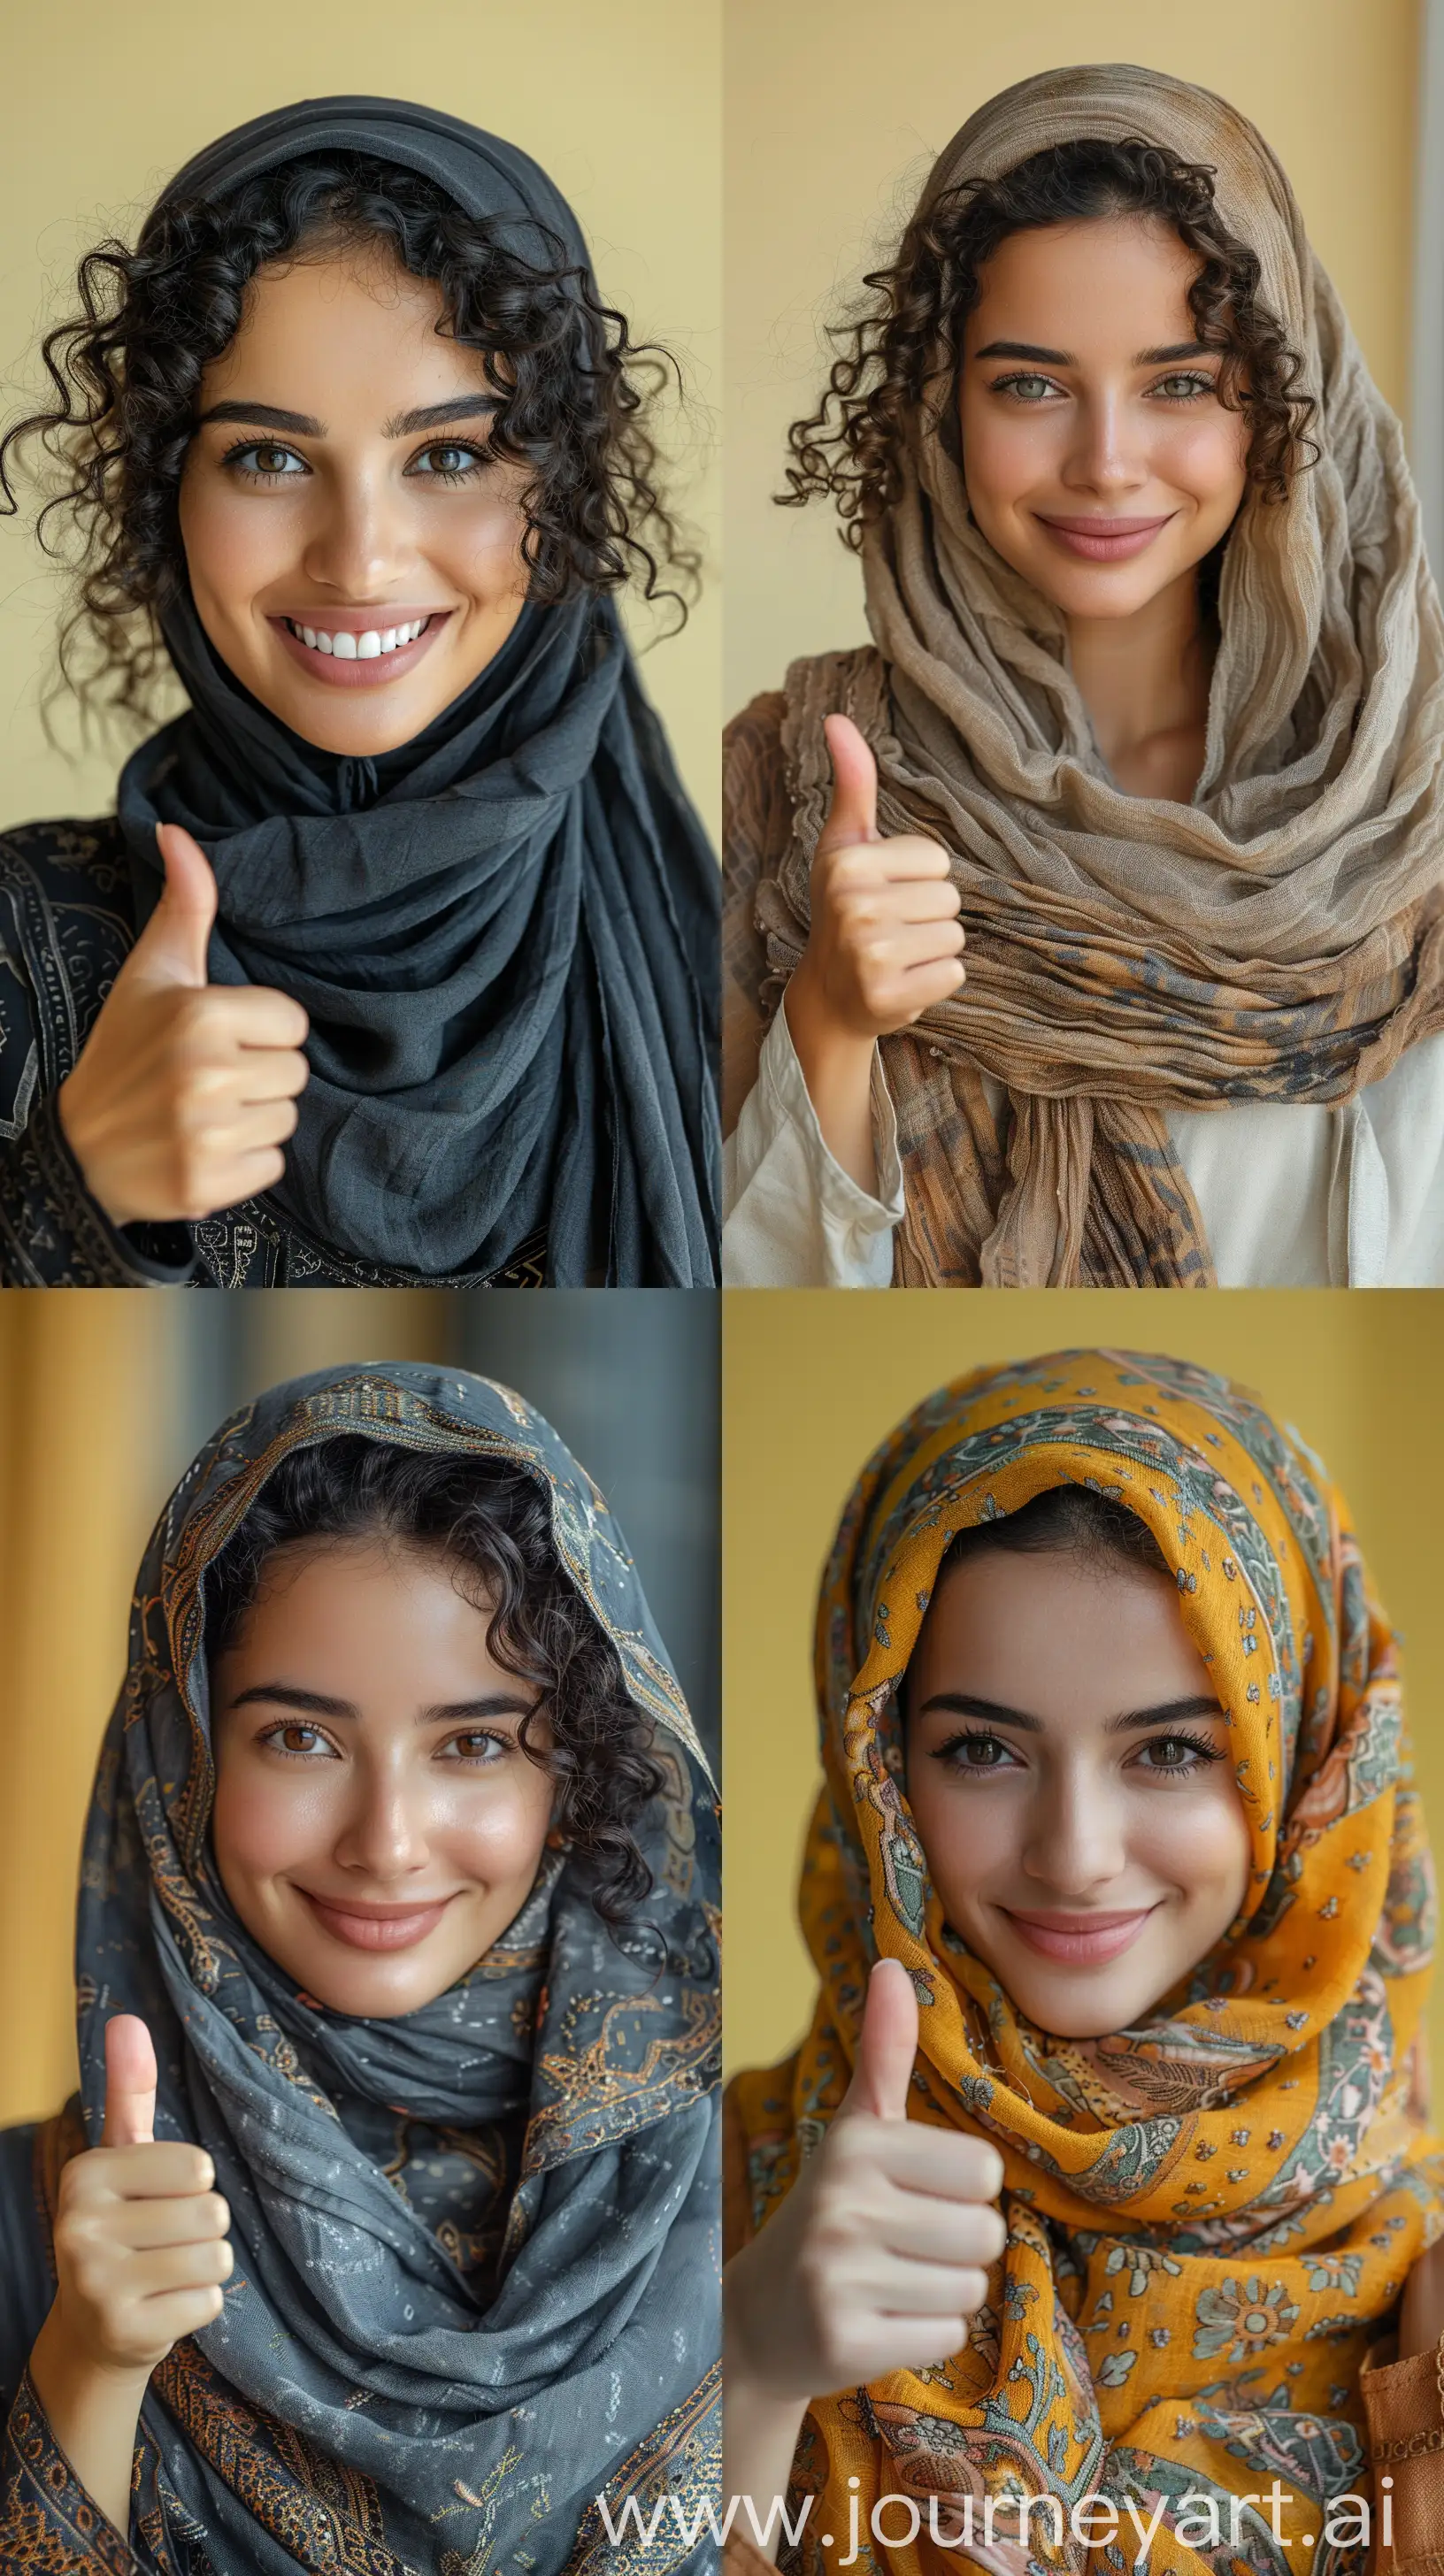 Cheerful-Woman-in-Hijab-Giving-Thumbs-Up-on-Vibrant-Yellow-Background